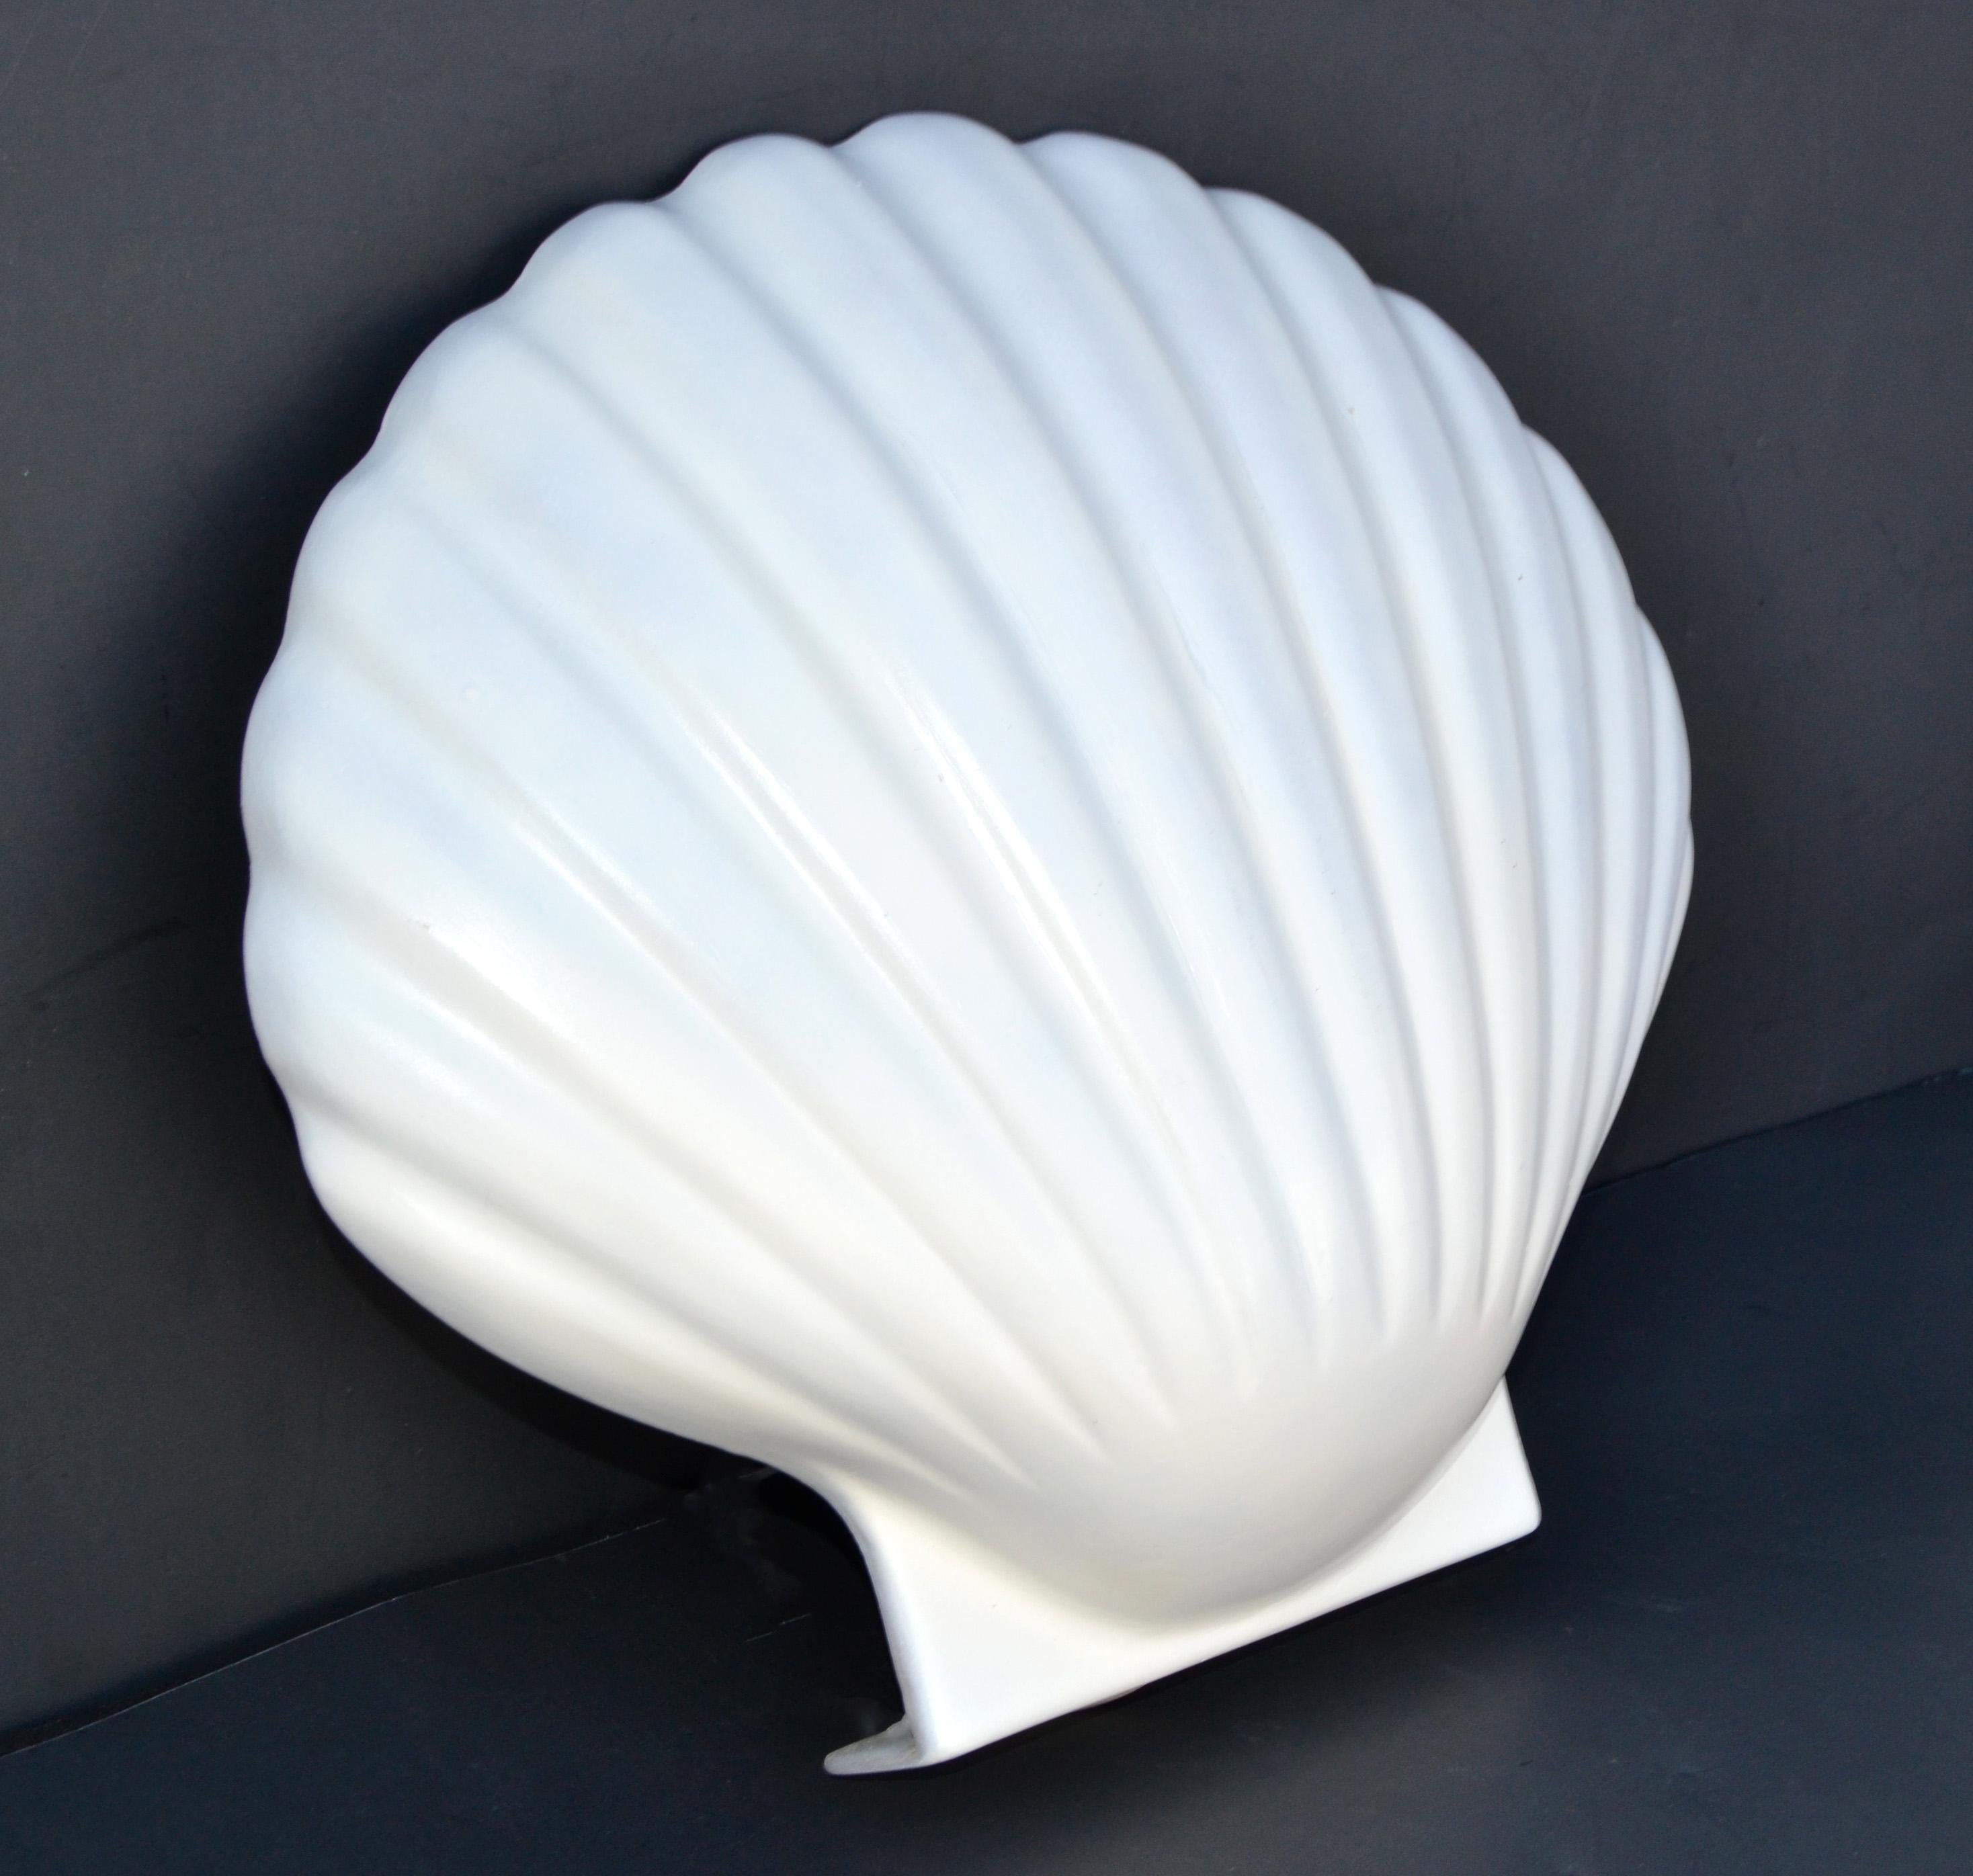 Nice Fiberglass 'St Jacques' sconce, wall lamp by Andre Cazenave. 
Mid-Century Modern design made in 1975.
The Scallop Shell takes one light, 40 watts max. US rewired and in working condition.
Have a look on our impressive collection of more than